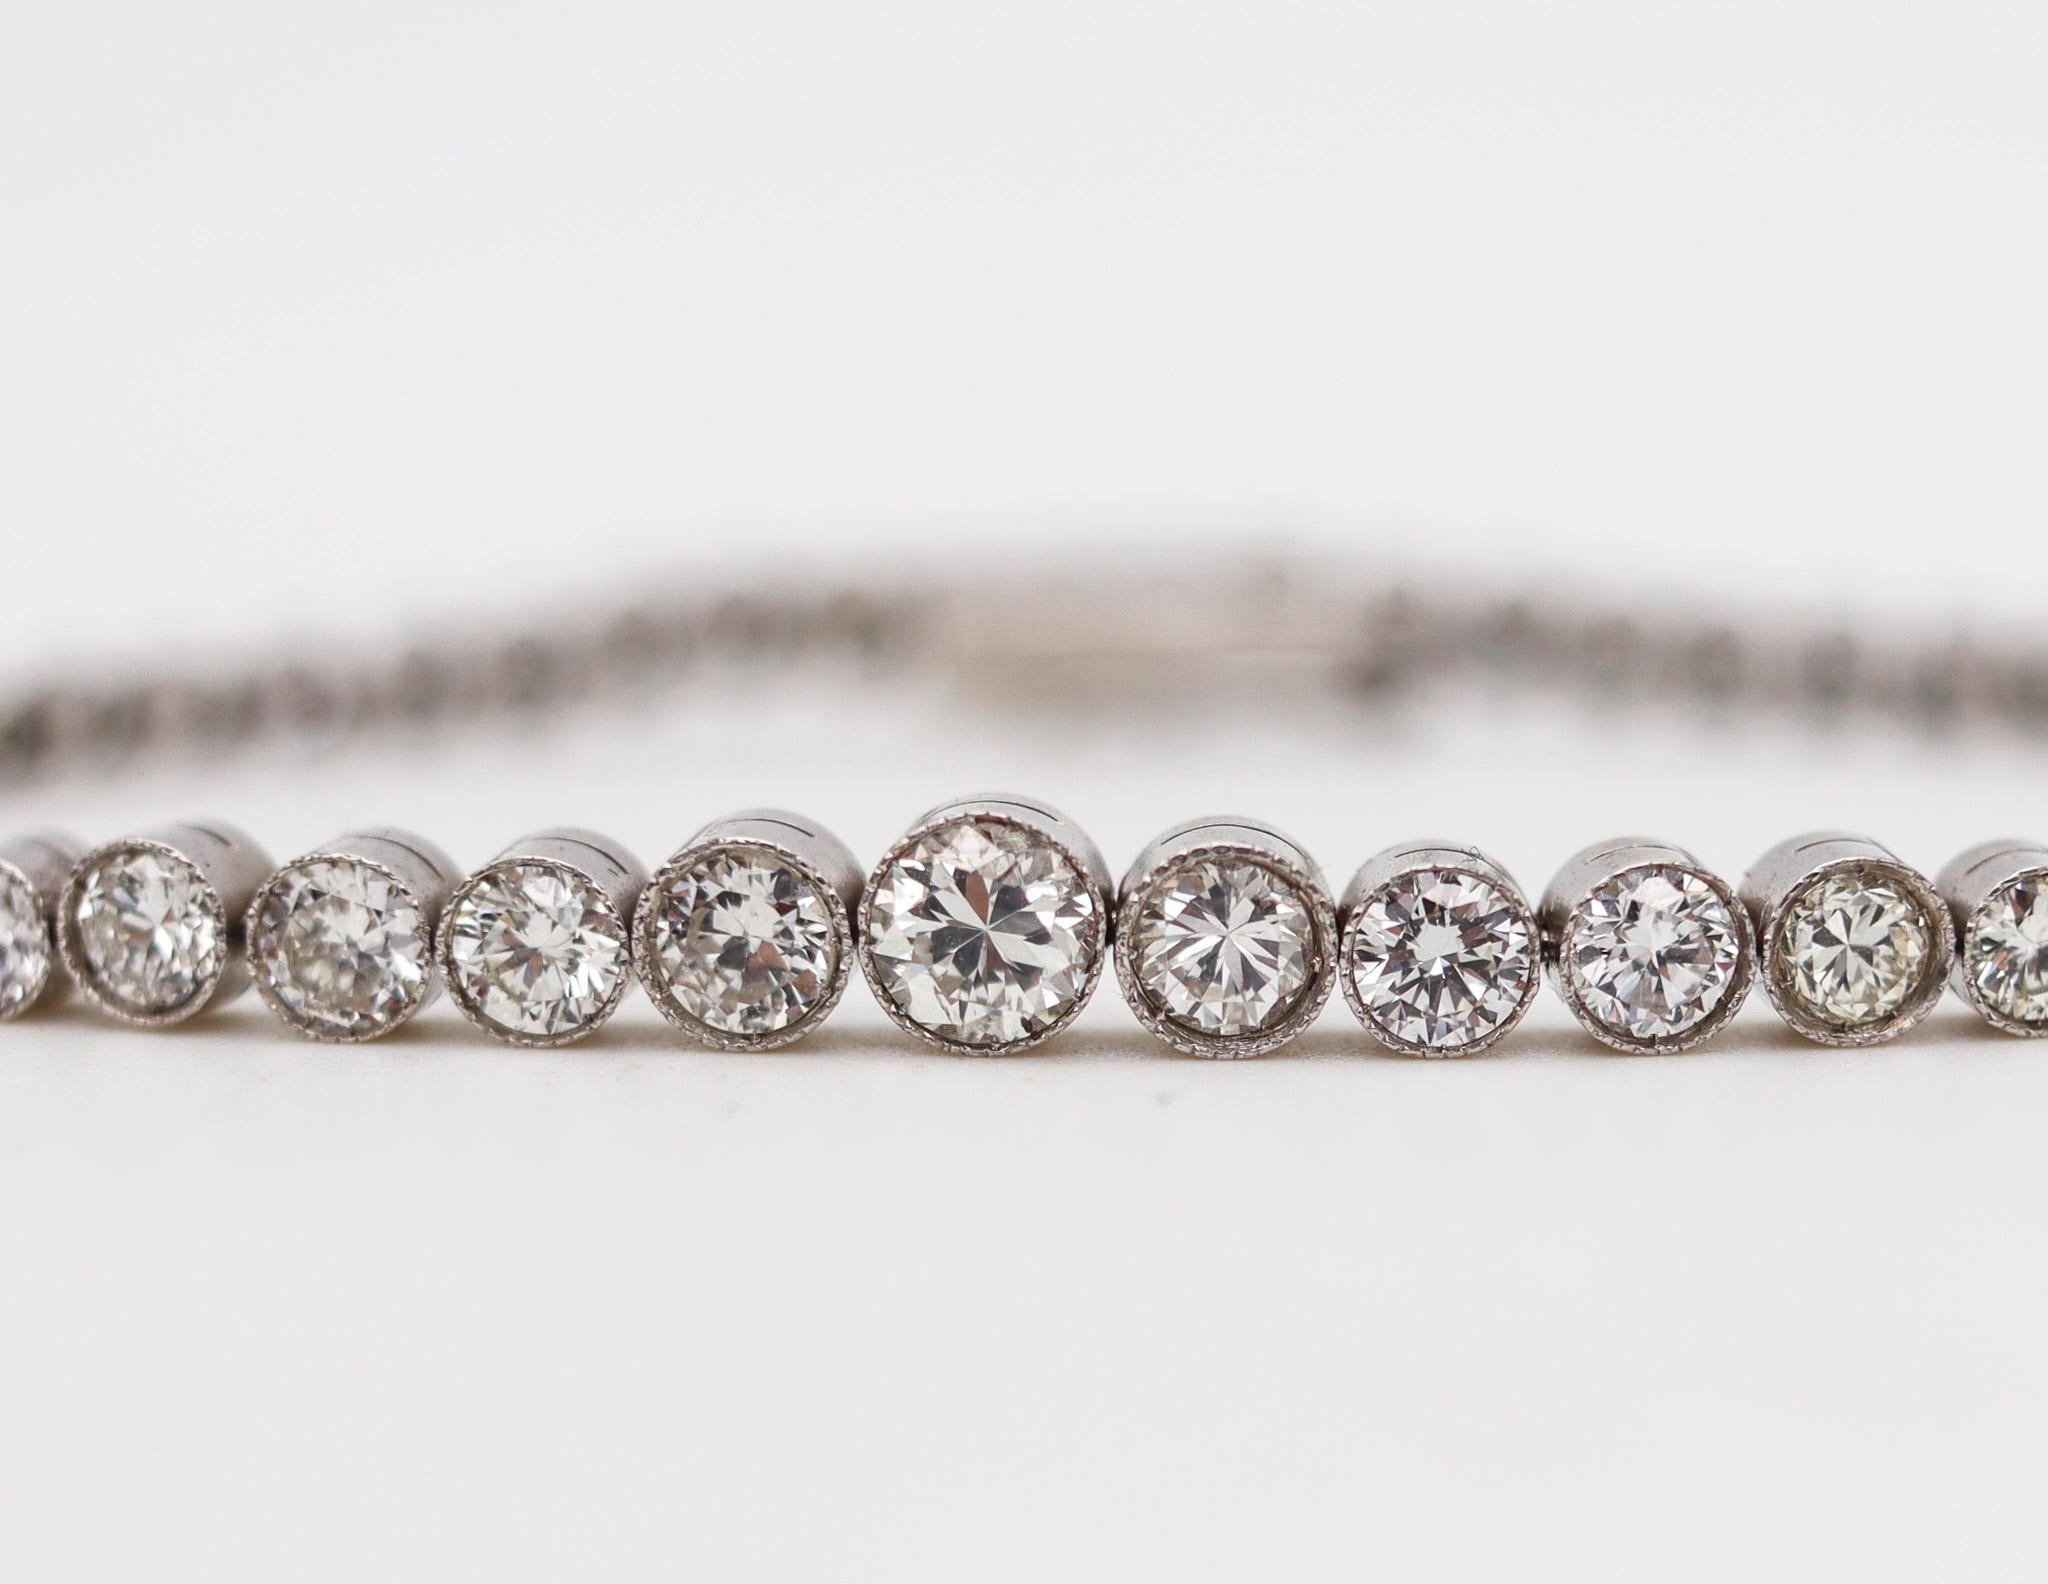 An art deco graduated Riviera bracelet.

Beautiful Riviera diamonds bracelet, created during the art deco period, back in the 1935. This bracelet has been crafted with impeccable details in solid platinum and embellished with graduated fifty-three